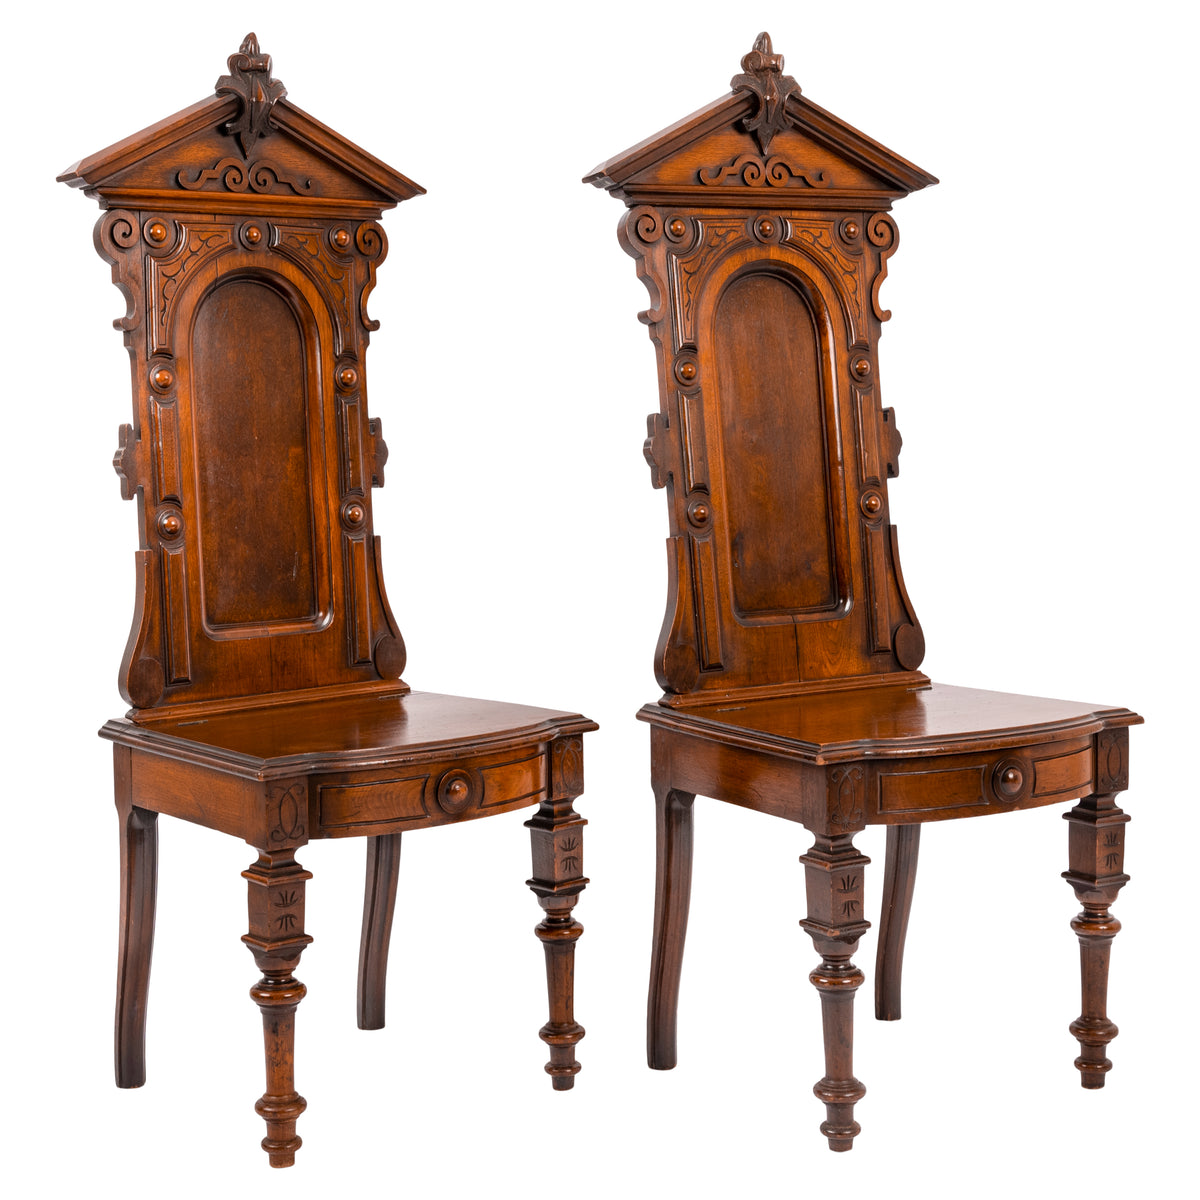 Antique Pair of American High Back Walnut Renaissance Revival Carved Hall Chairs, Circa 1870